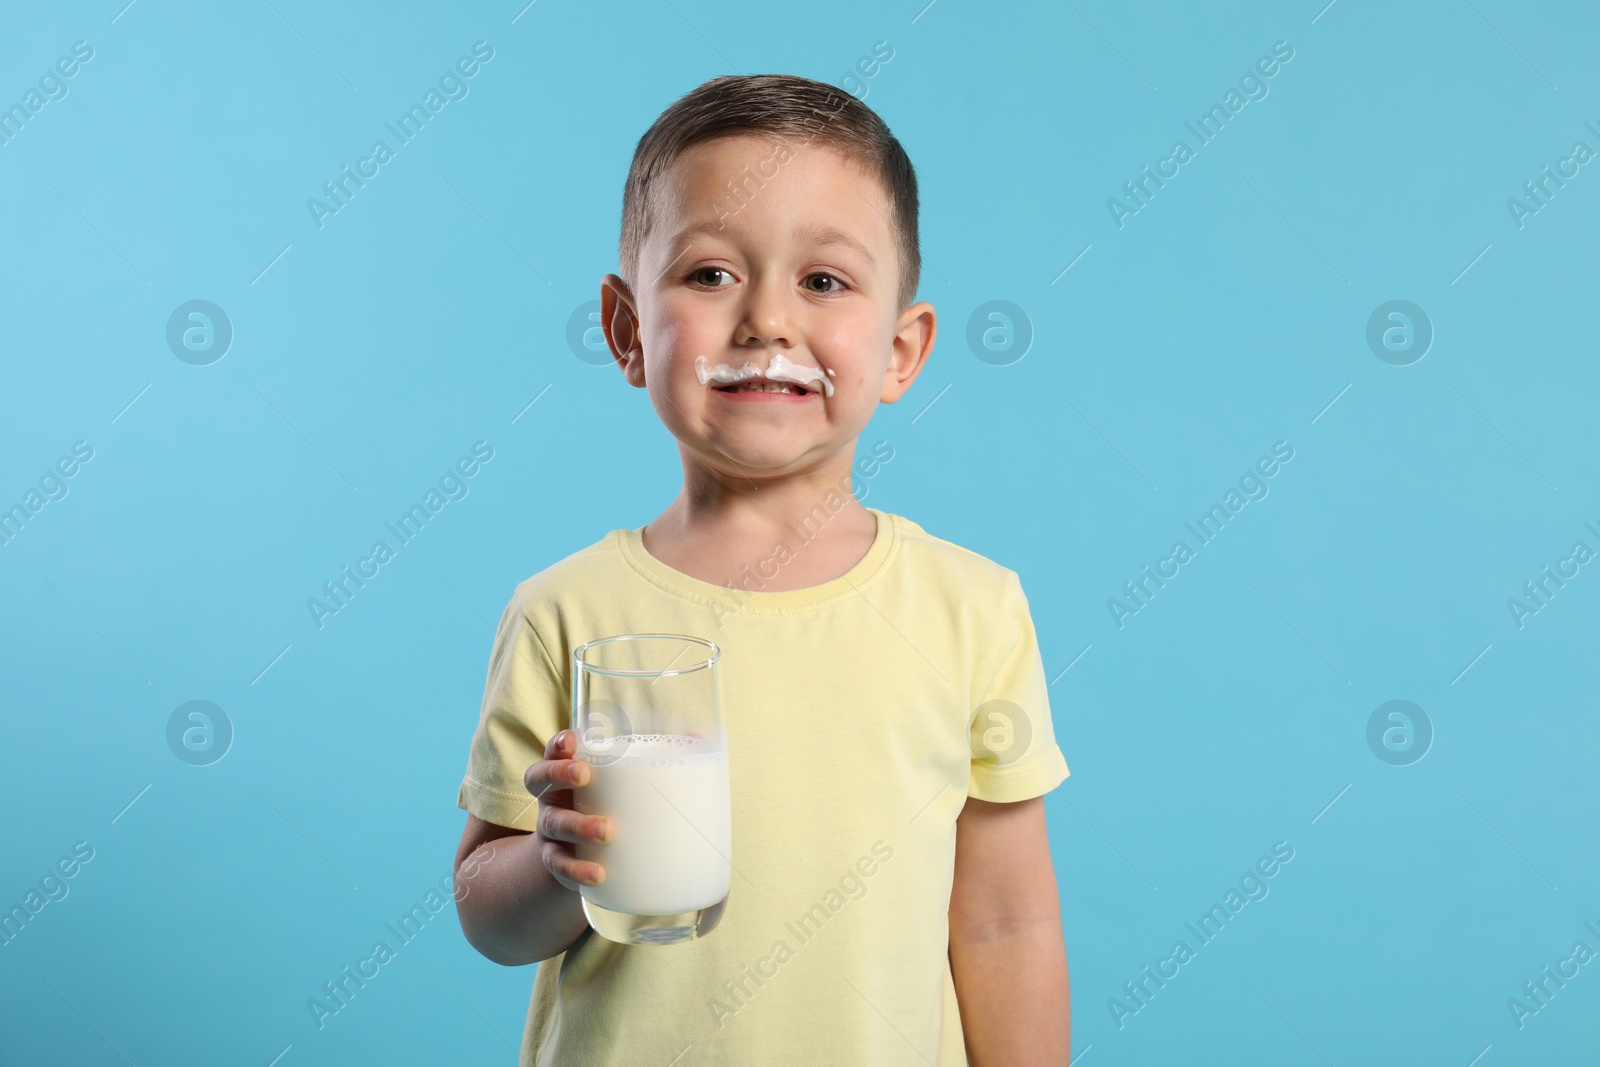 Photo of Cute boy with milk mustache holding glass of tasty dairy drink on light blue background